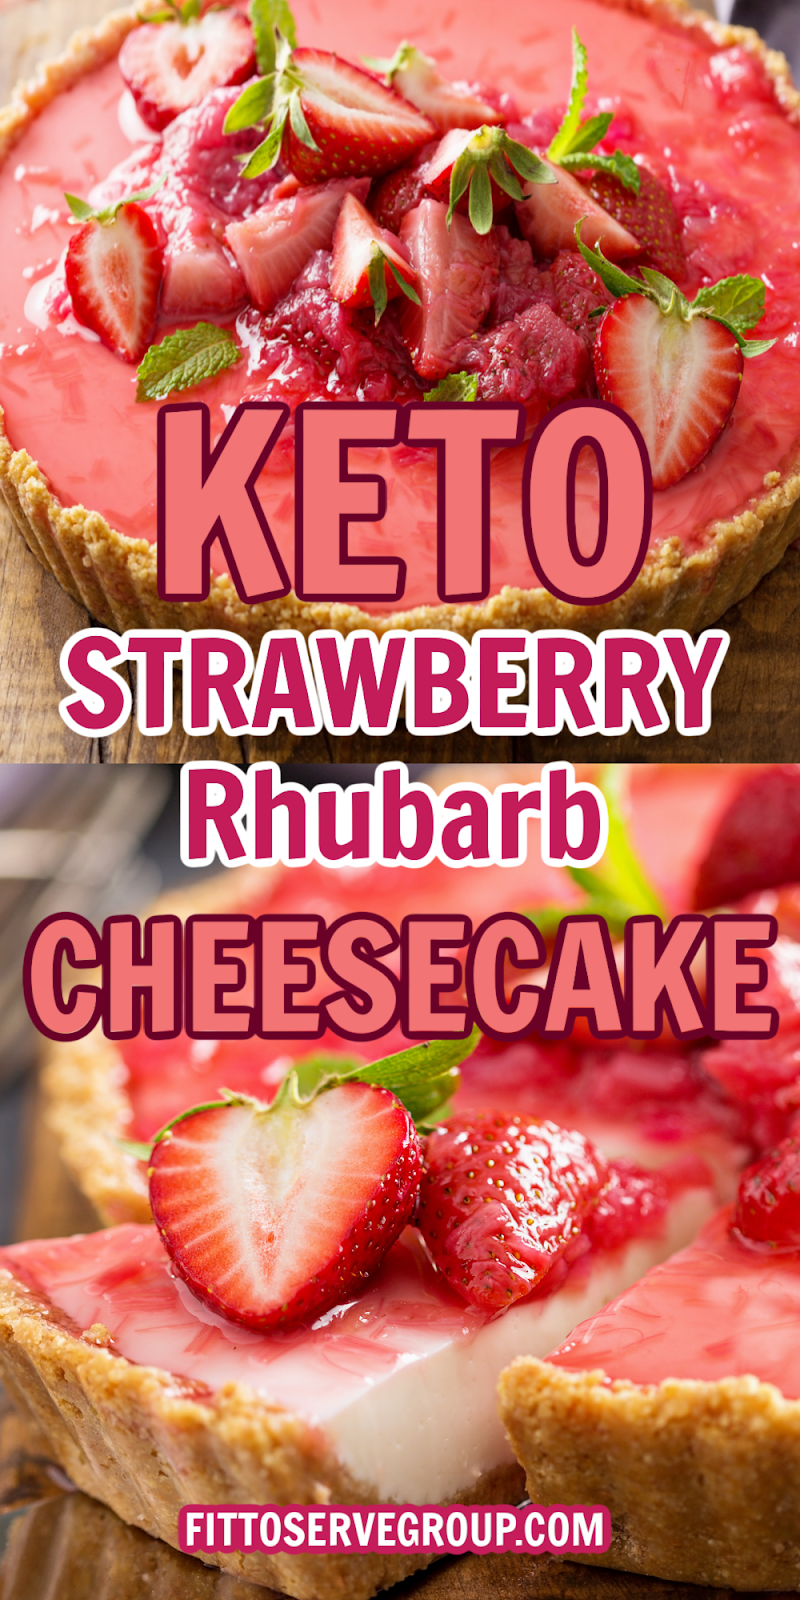 Keto Strawberry Rhubarb Cheesecake two images close up one of a whole tart the other of the cheesecake sliced.